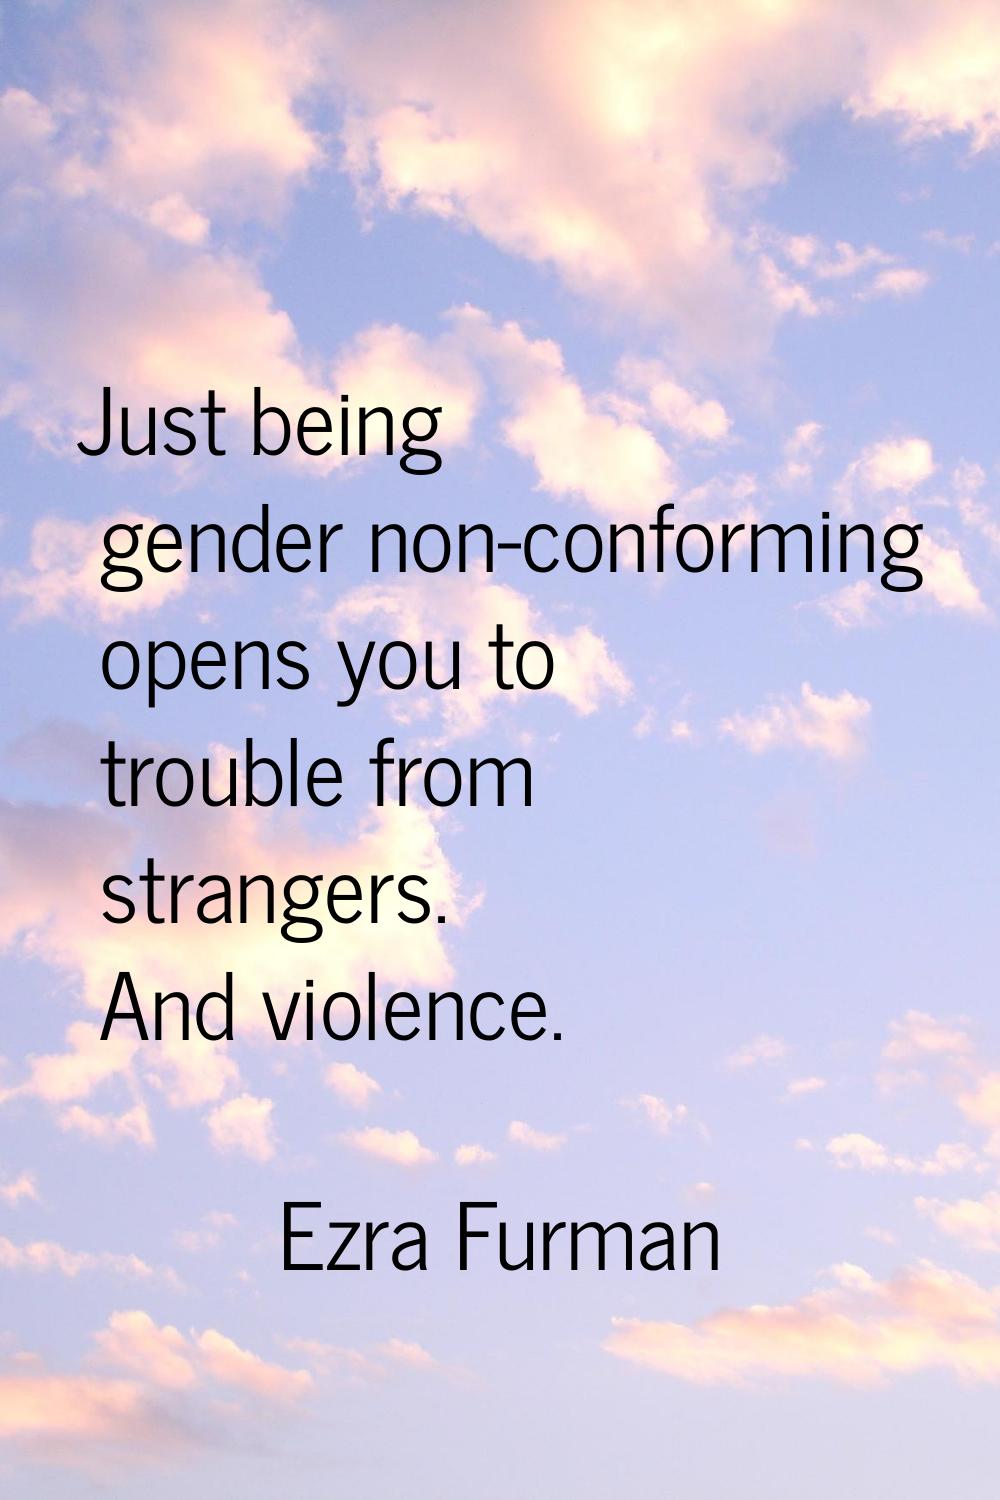 Just being gender non-conforming opens you to trouble from strangers. And violence.